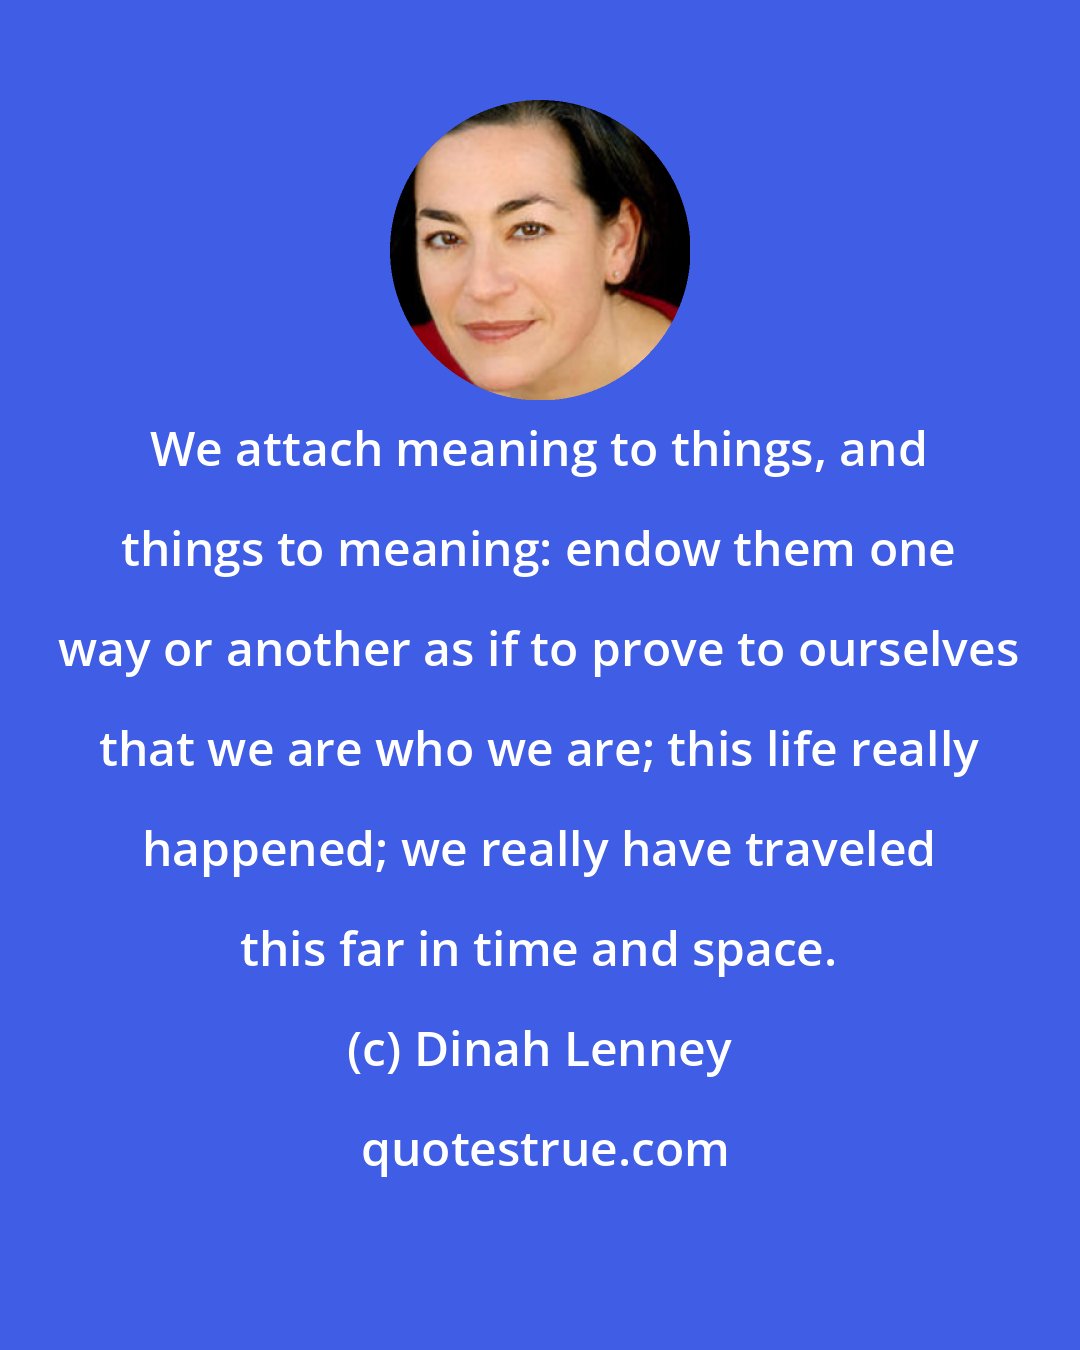 Dinah Lenney: We attach meaning to things, and things to meaning: endow them one way or another as if to prove to ourselves that we are who we are; this life really happened; we really have traveled this far in time and space.